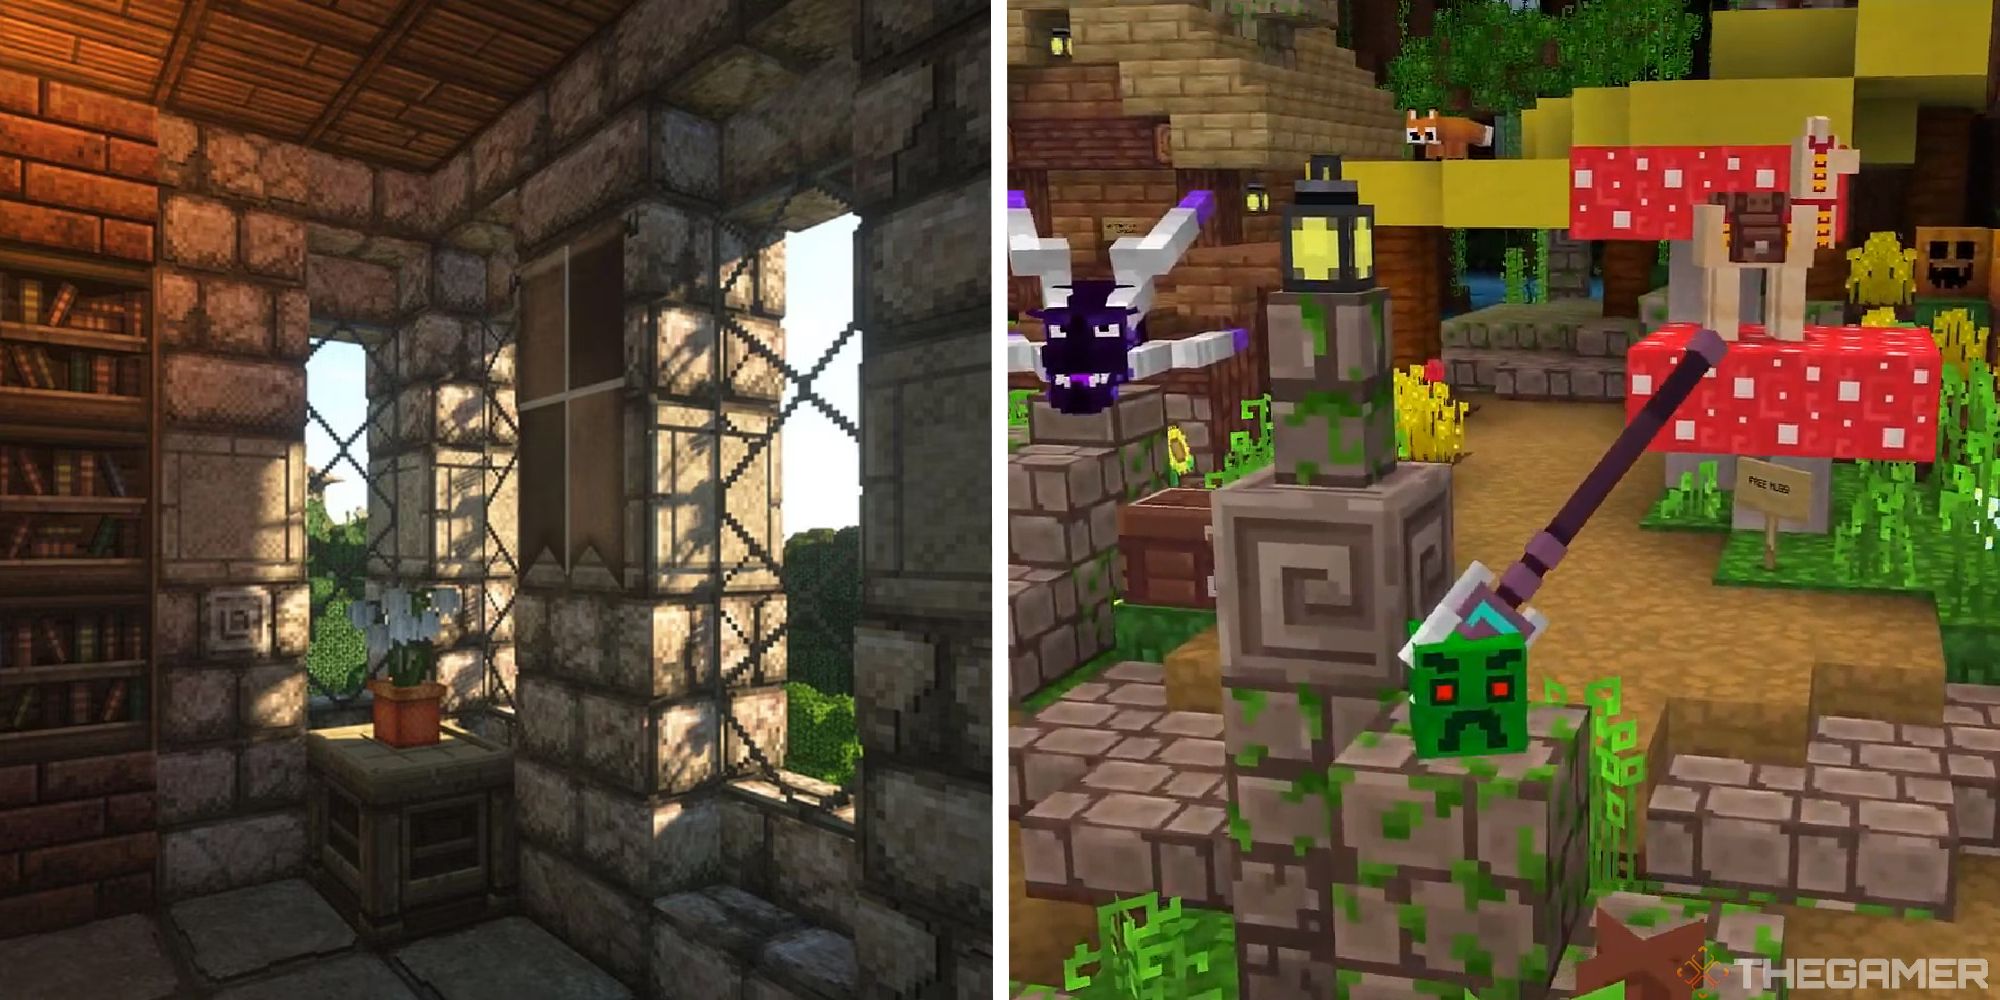 Top 5 Featured Minecraft Modpacks on CurseForge 2021 - TeamVisionary